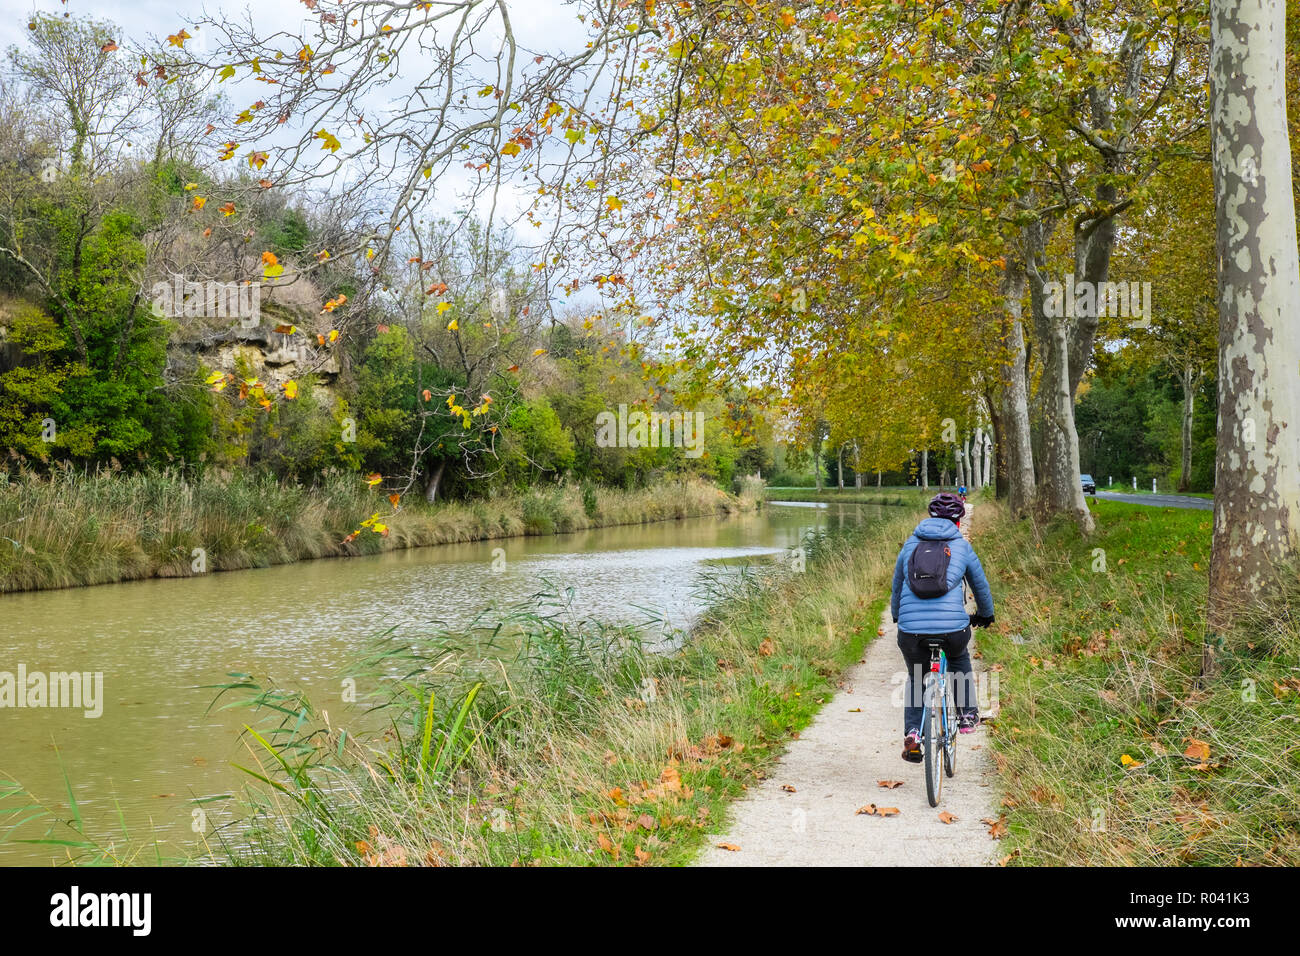 Cycling,Canal Du Midi,bicycle,ride,riding,Autumn,Fall,weather,near ...